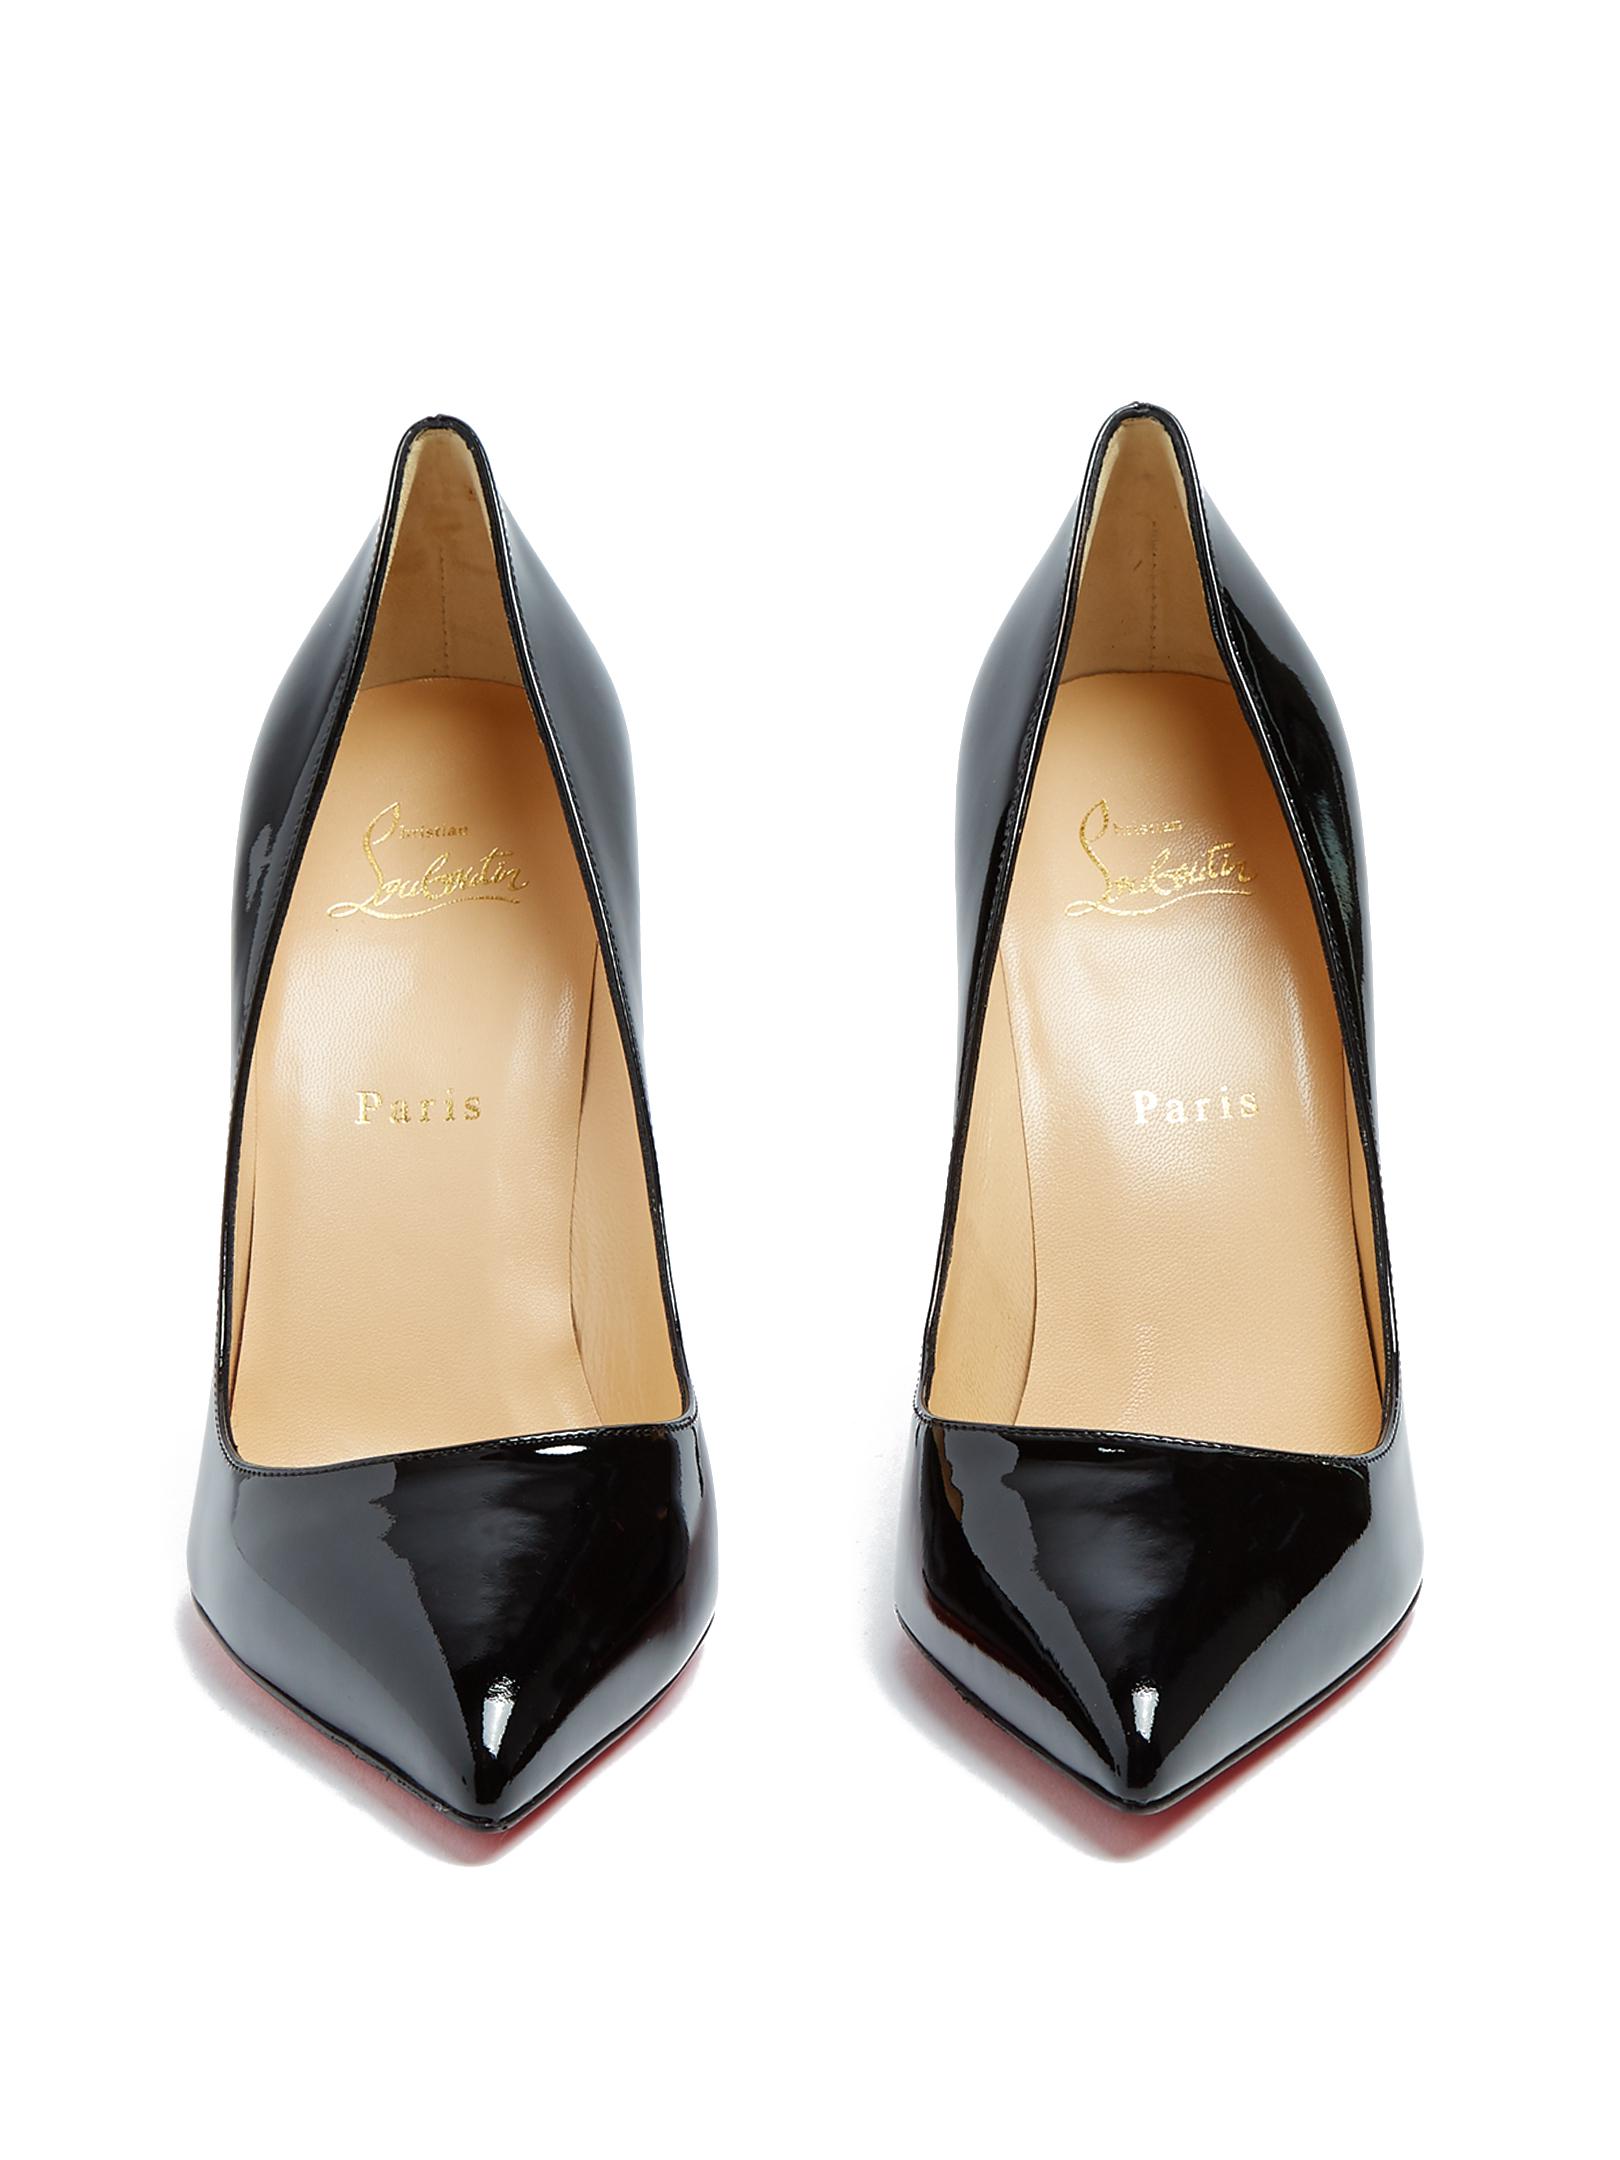 Christian Louboutin Pigalle 100mm Patent-leather Pumps in Black | Lyst